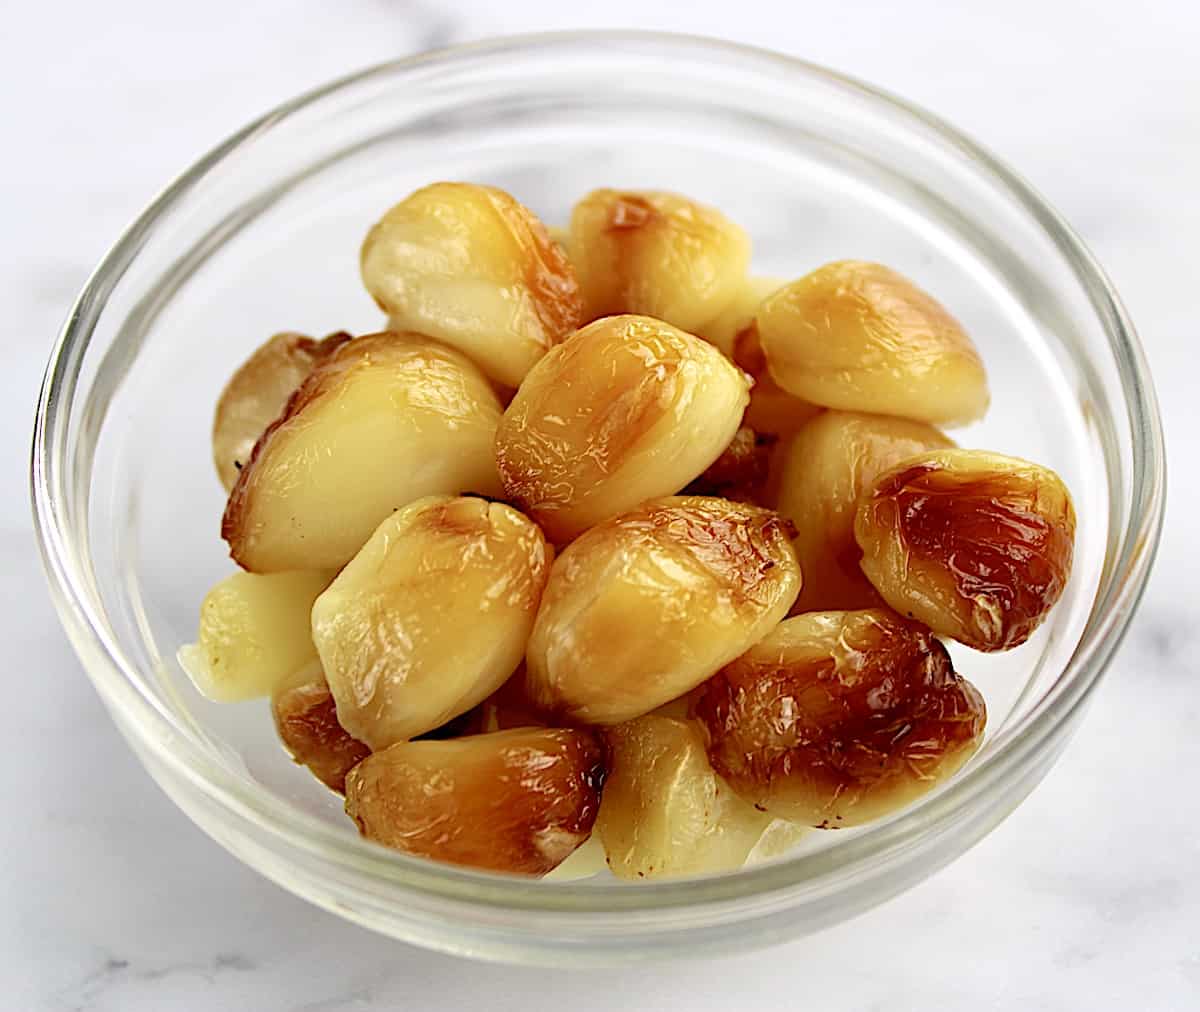 cloves of roasted garlic in glass bowl